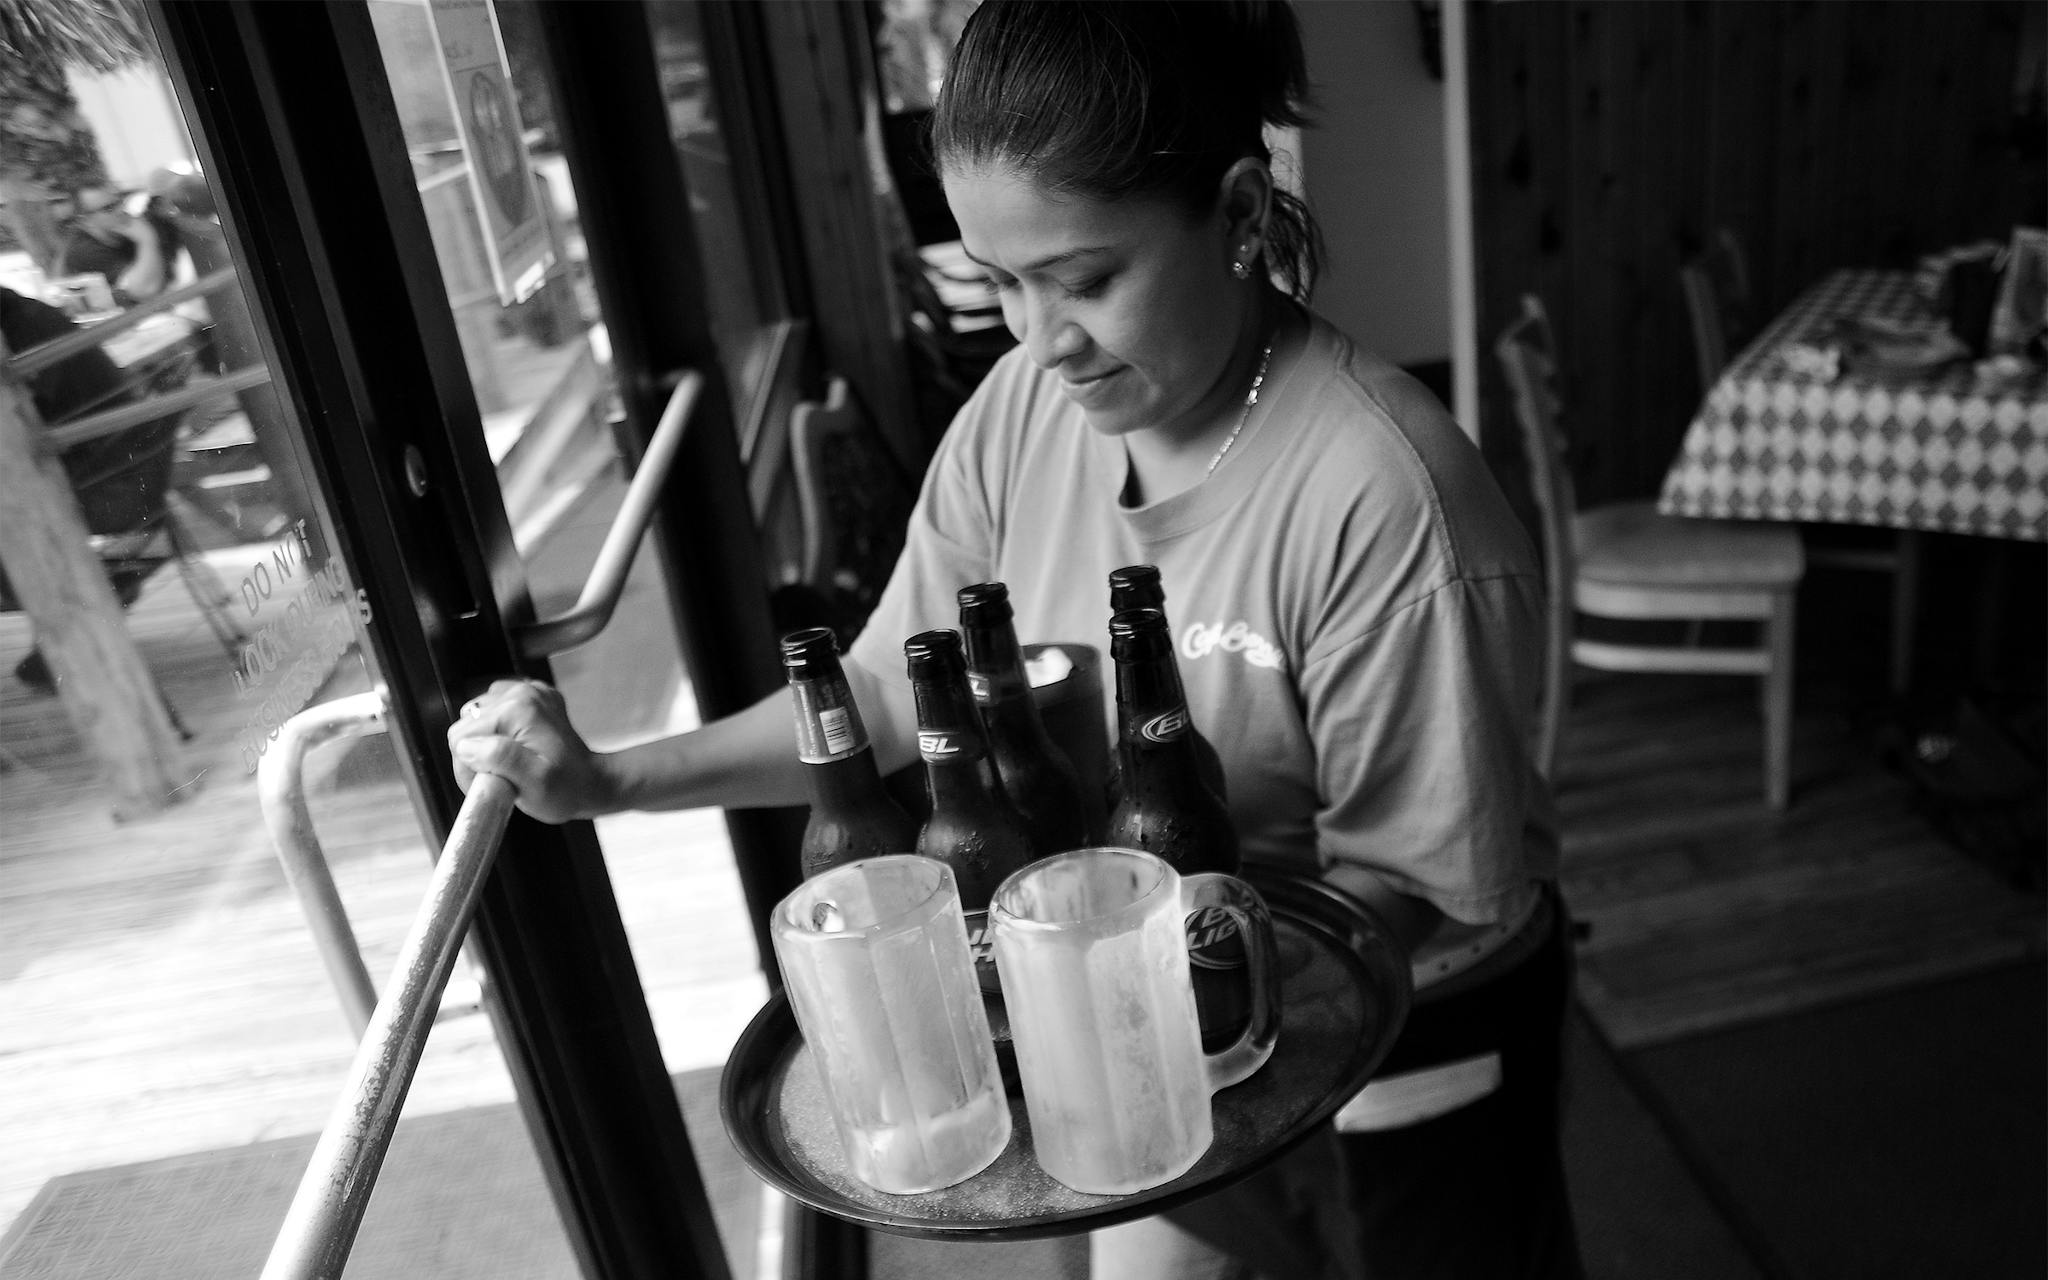 Maricela Juarez, Christian’s mother, works as a waitress at Capt. Benny’s Seafood in Austin on May 5, 2009.